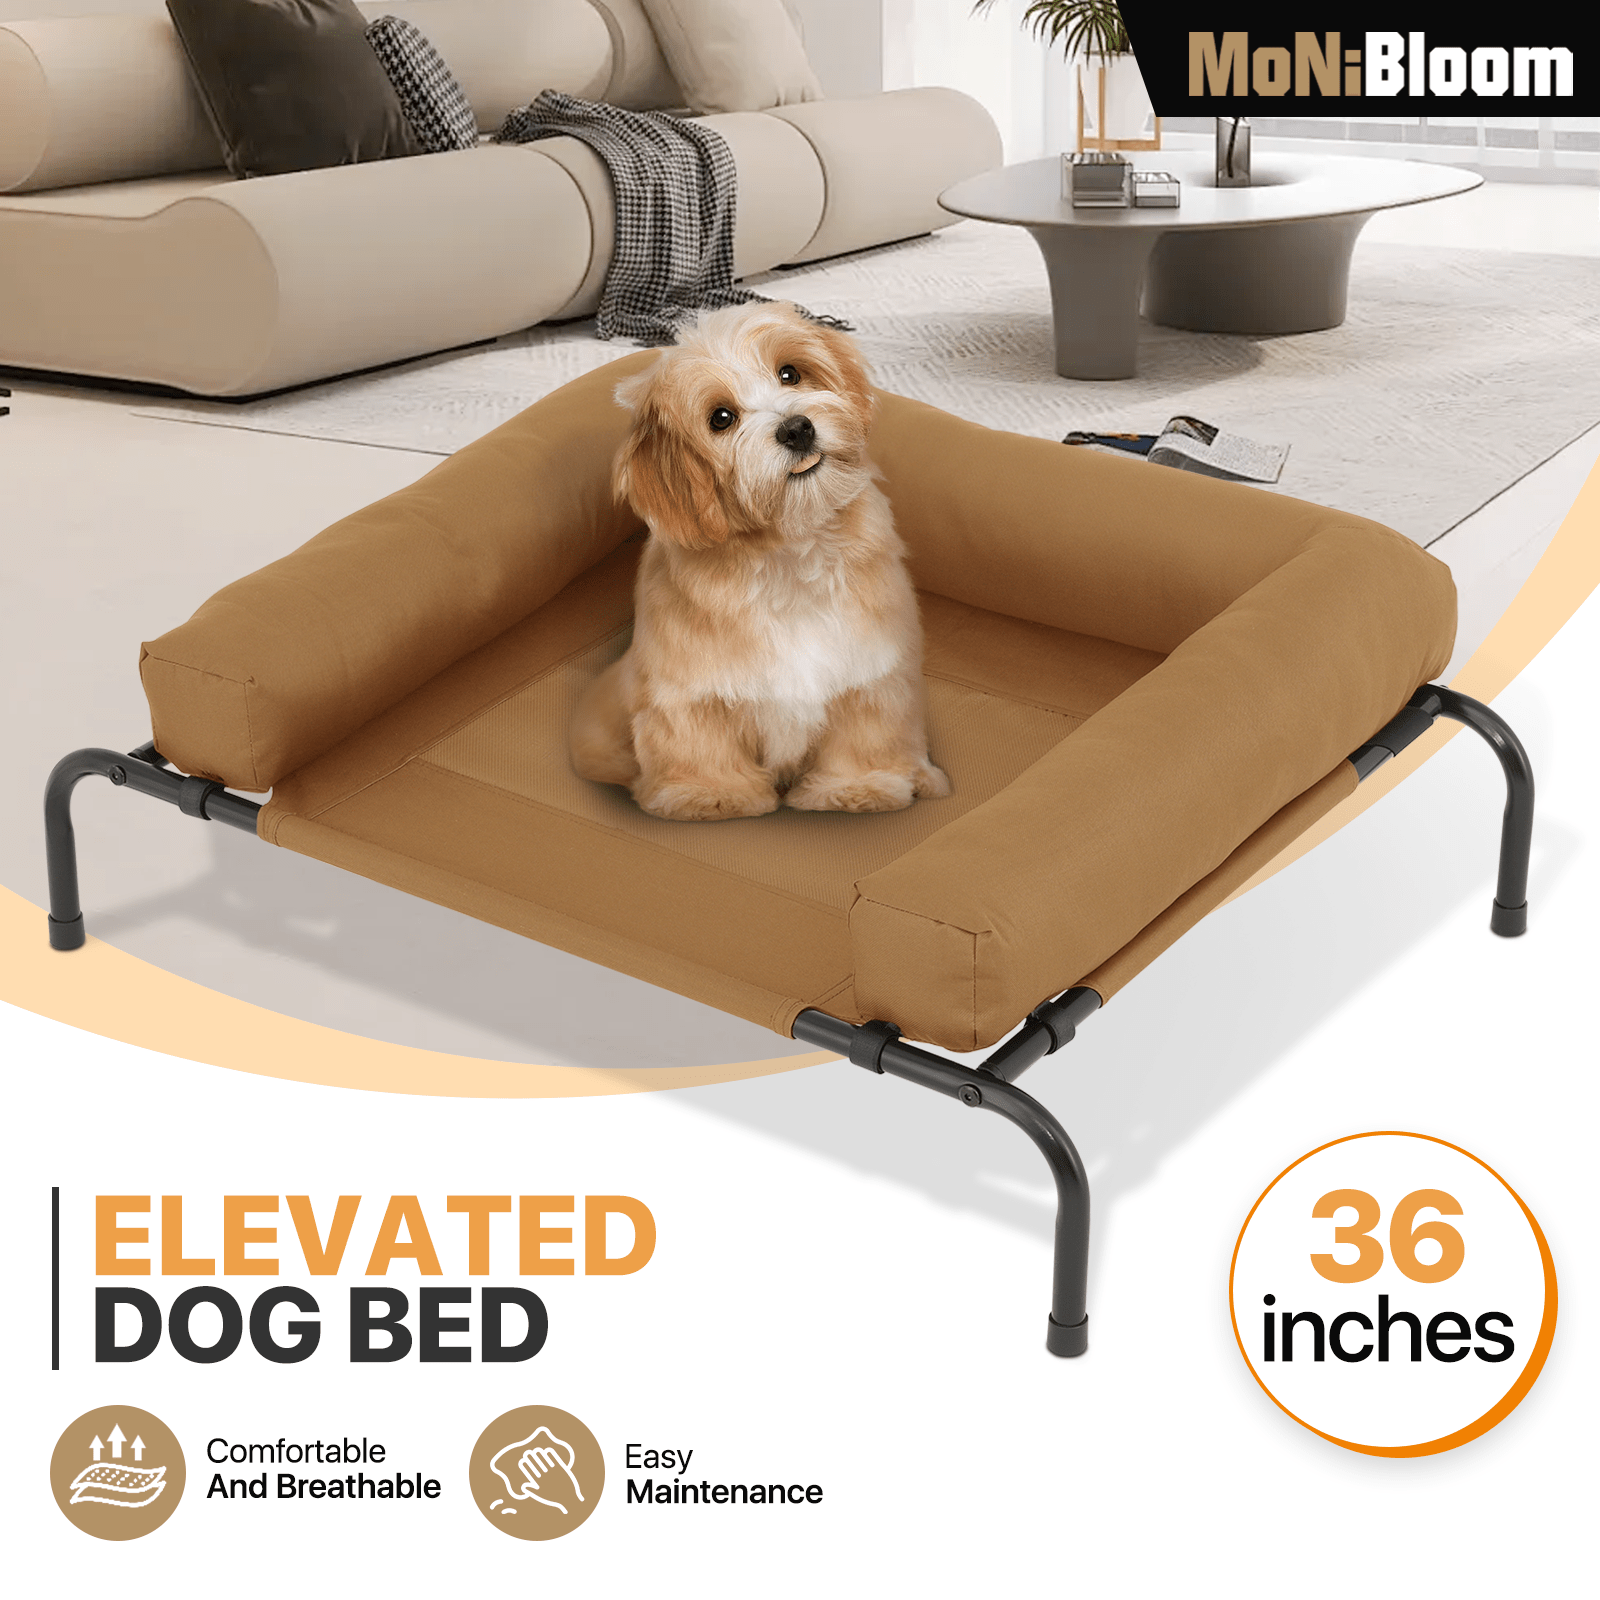 

Elevated Dog Bed With Removable Bolster, 2-in-1 Indoor/outdoor Dog Cot With Stable Anti-slip Feet & Breathable Mesh, 35.5 Inch Length For Small Dogs